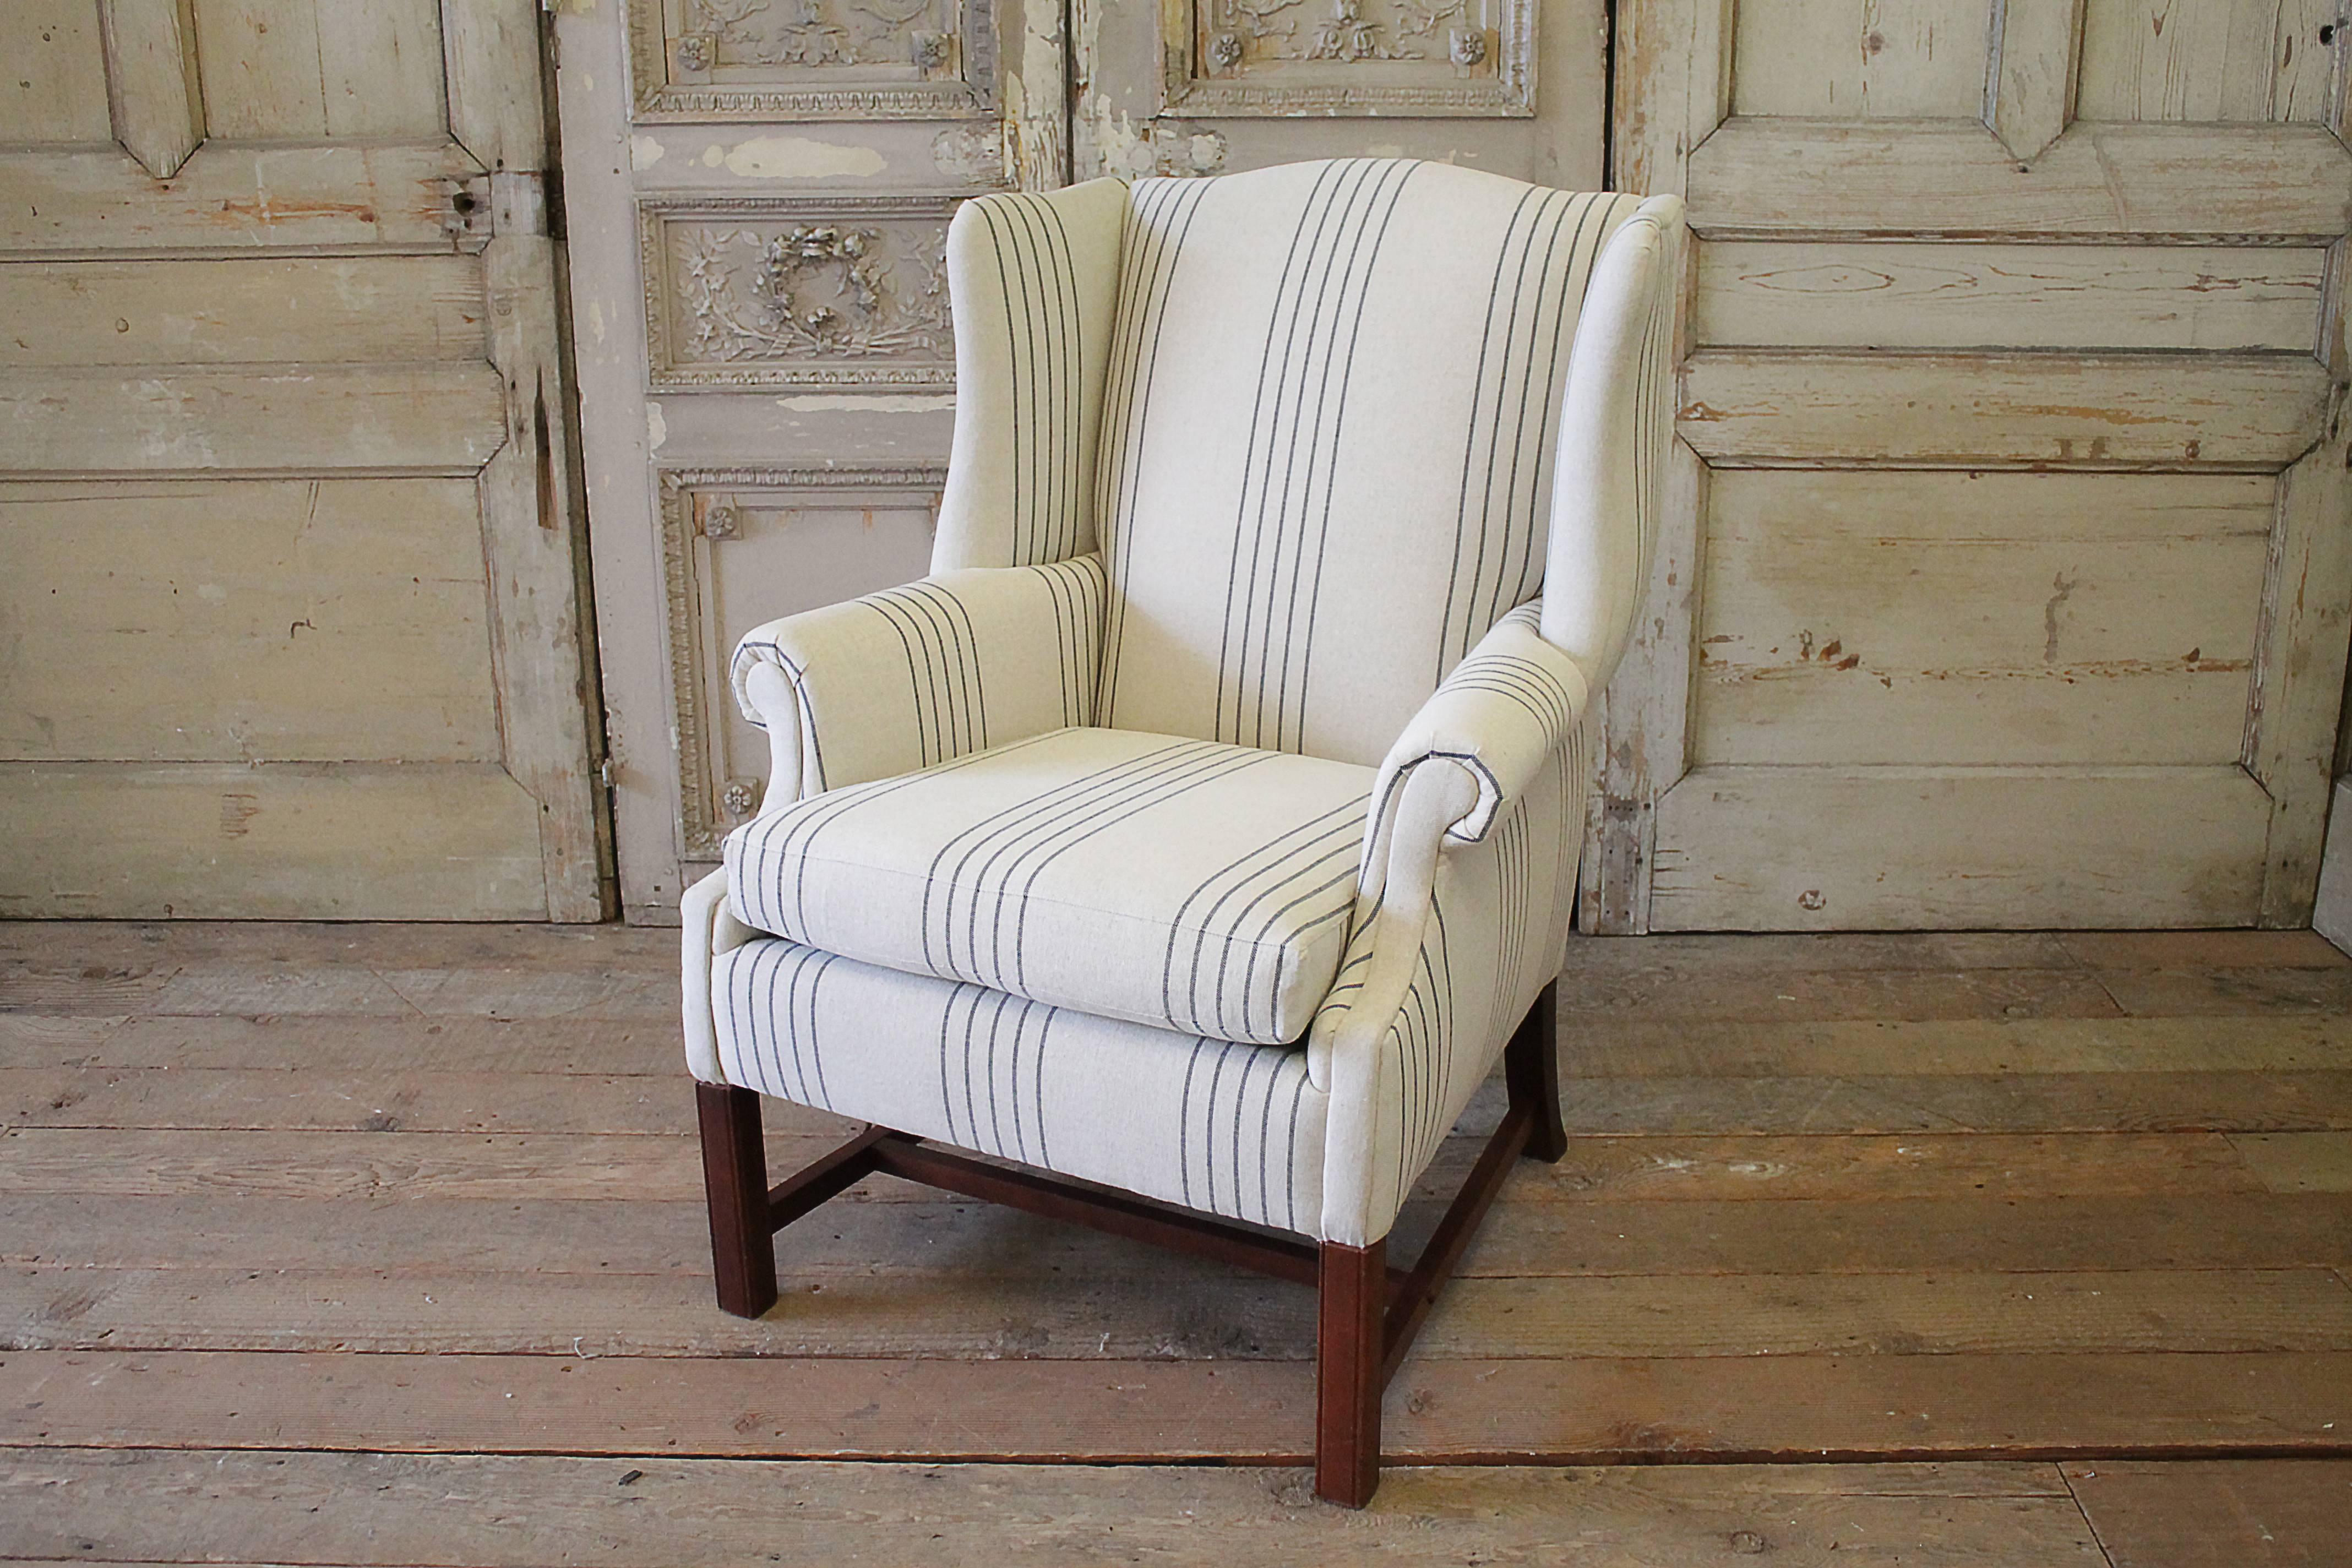 Handsome wing chair, with cherry legs, has been reupholstered in a 100% pure French Linen. The linen is natural flax, with a black stripe. Legs are solid and sturdy. The seat foam, with a removable seat cushion.
Measures: 41